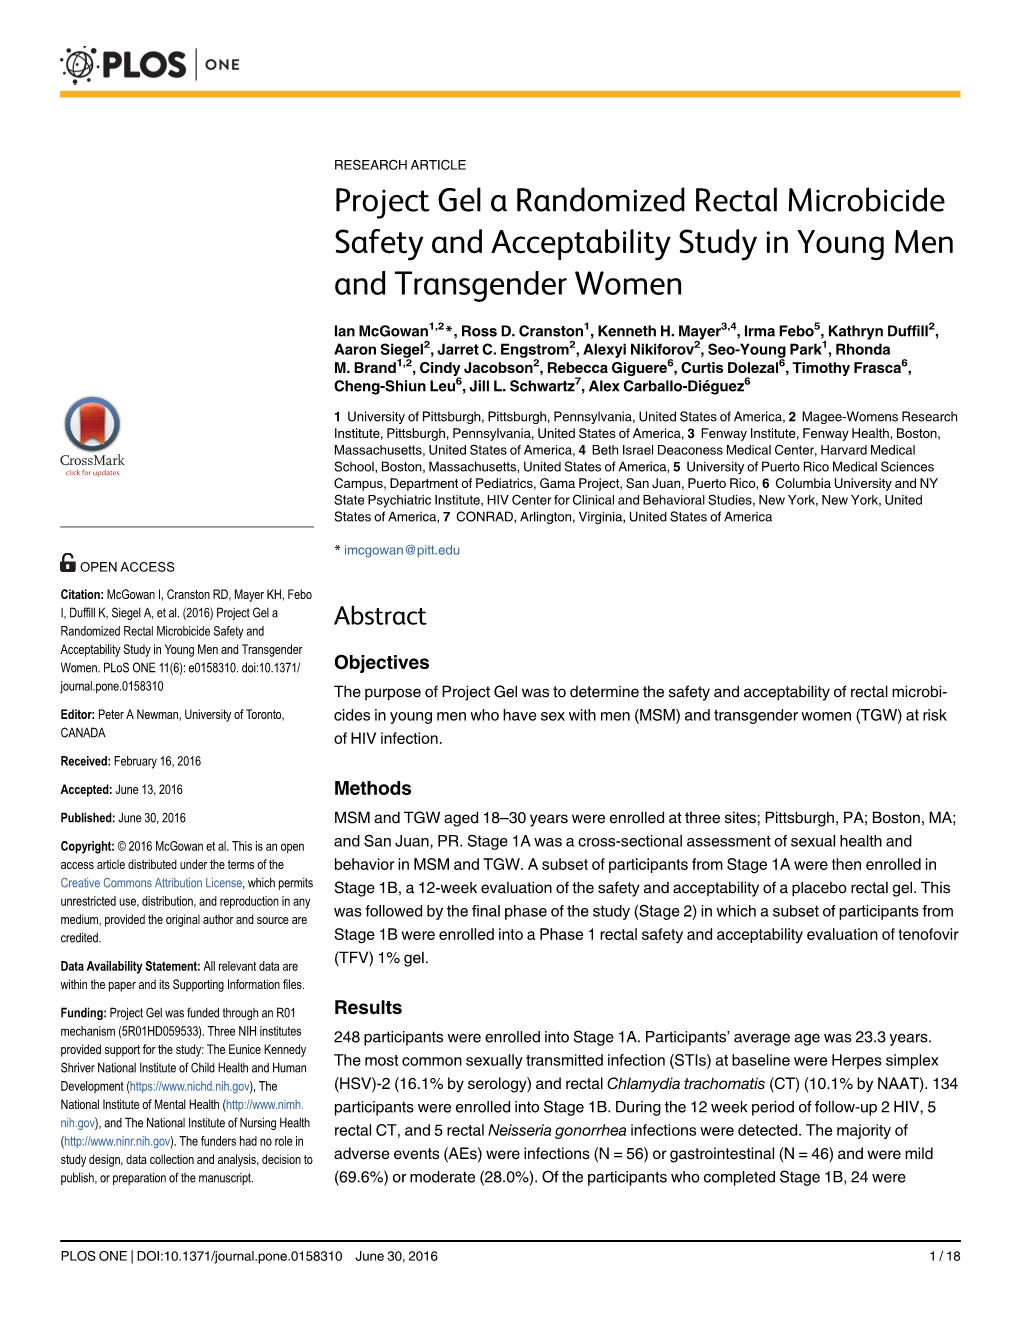 Project Gel a Randomized Rectal Microbicide Safety and Acceptability Study in Young Men and Transgender Women